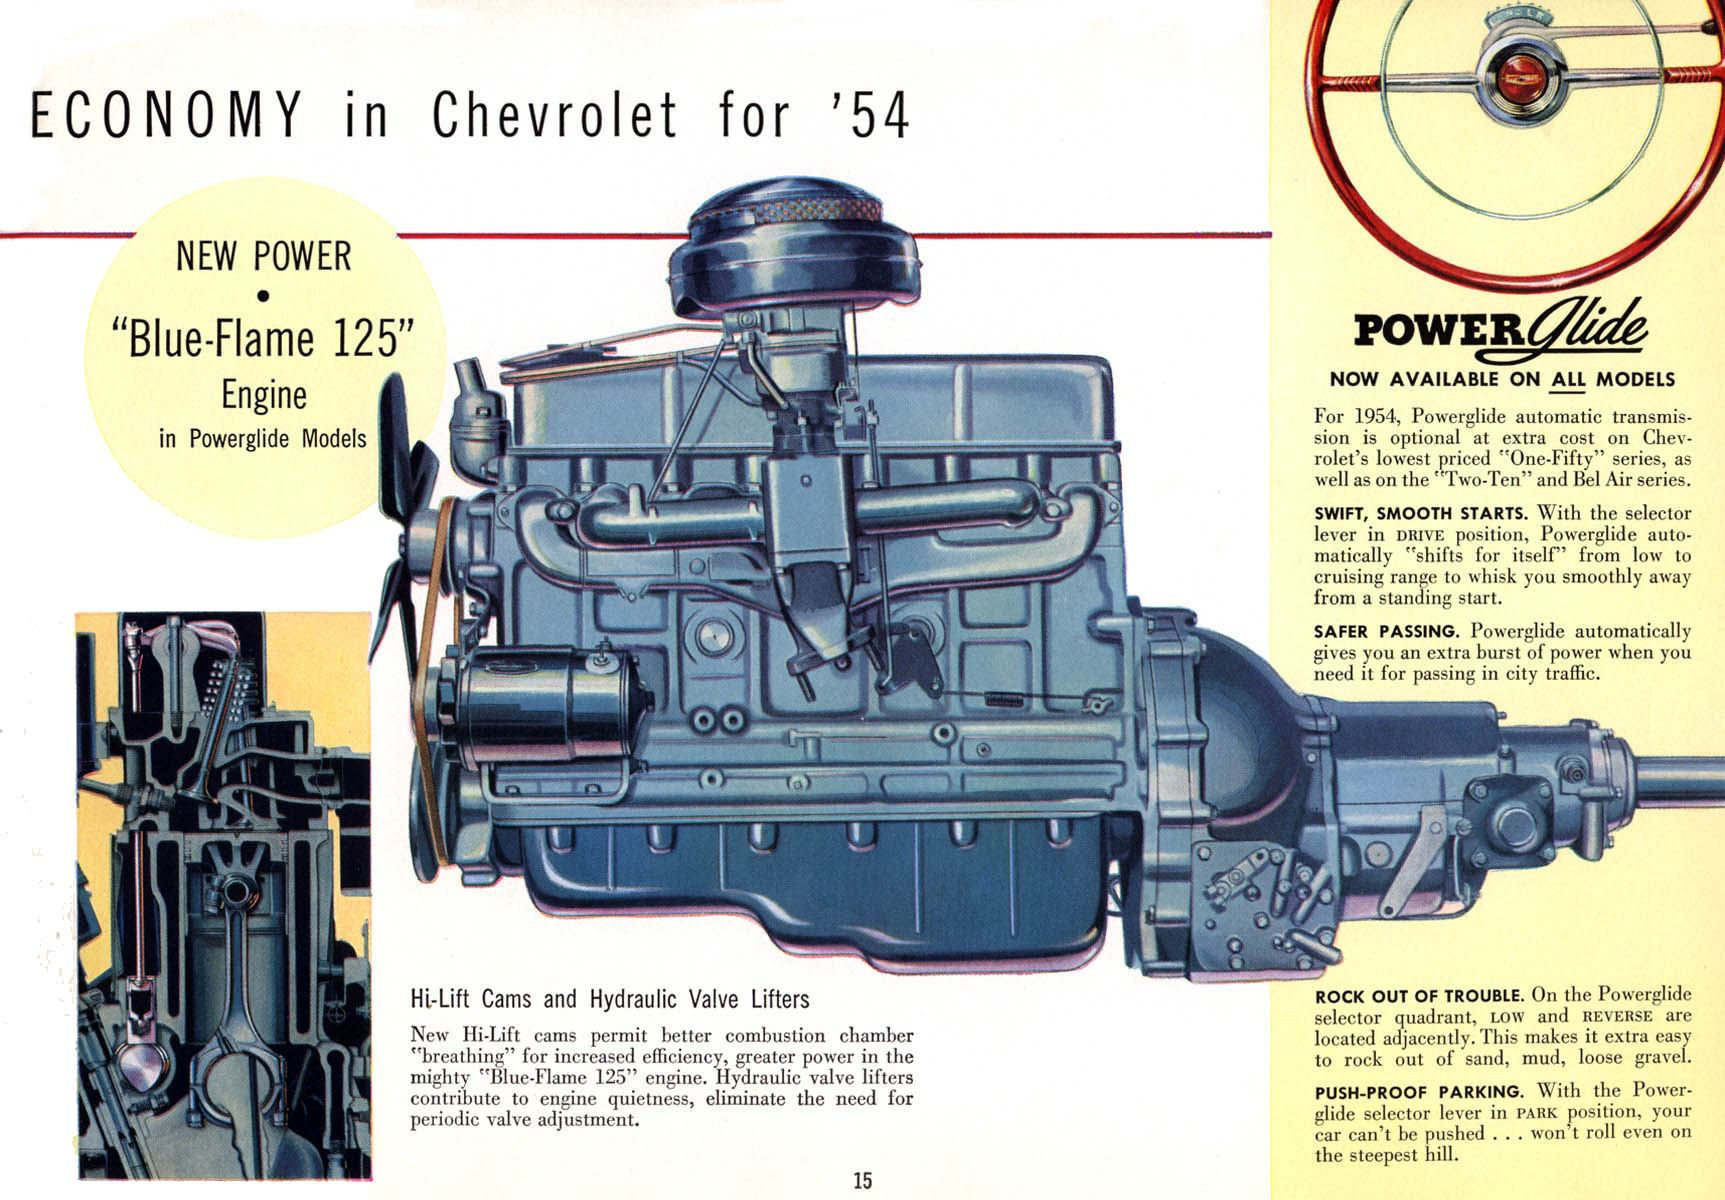 1954 Chevrolet Brochure Page 15